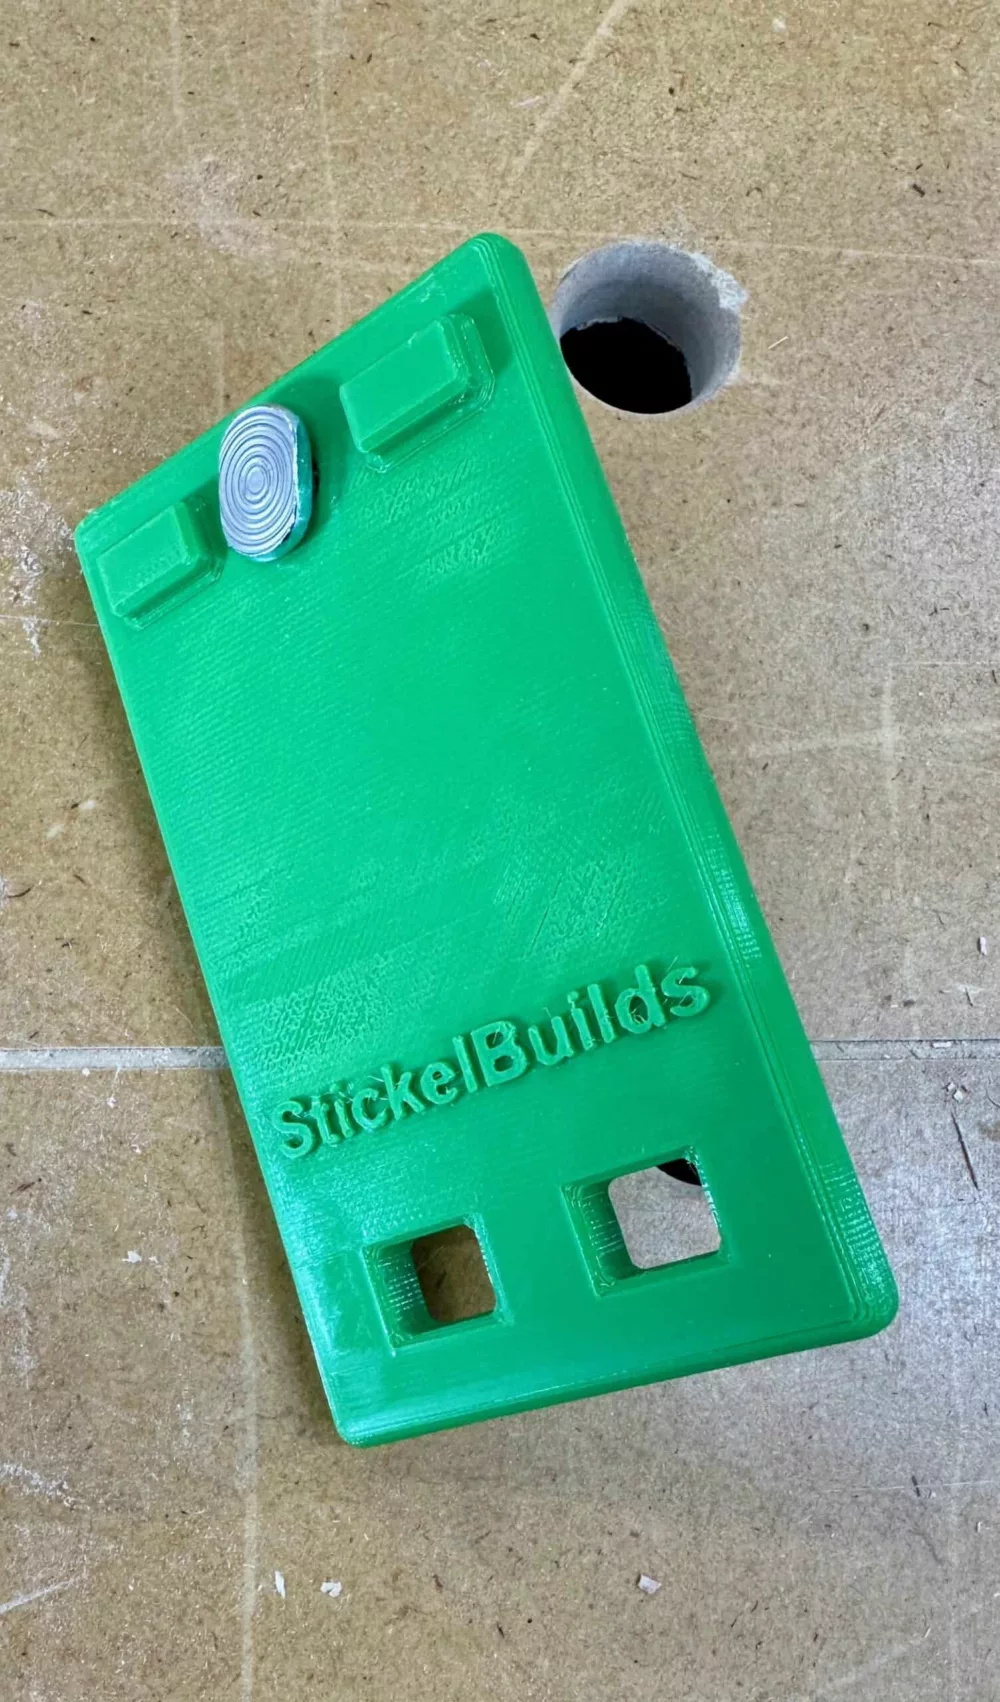 green quick clamp storage hangar on a workbench. text embossed on the product says Stickel Builds